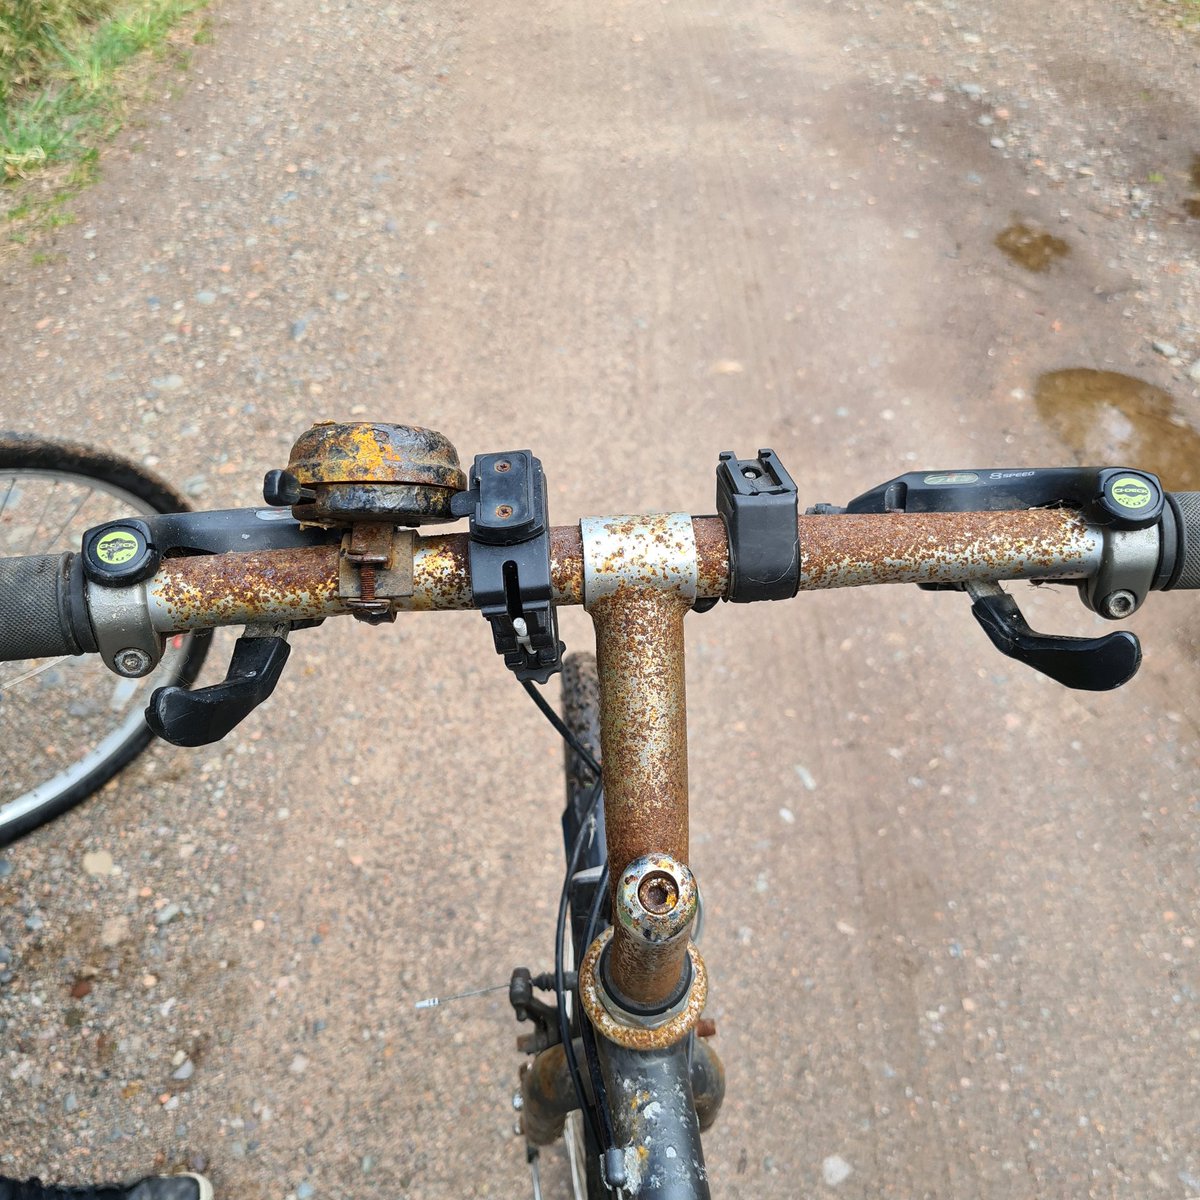 Had this bike almost 25 years. Rides as good as new. Doesn’t look quite the same, mind.